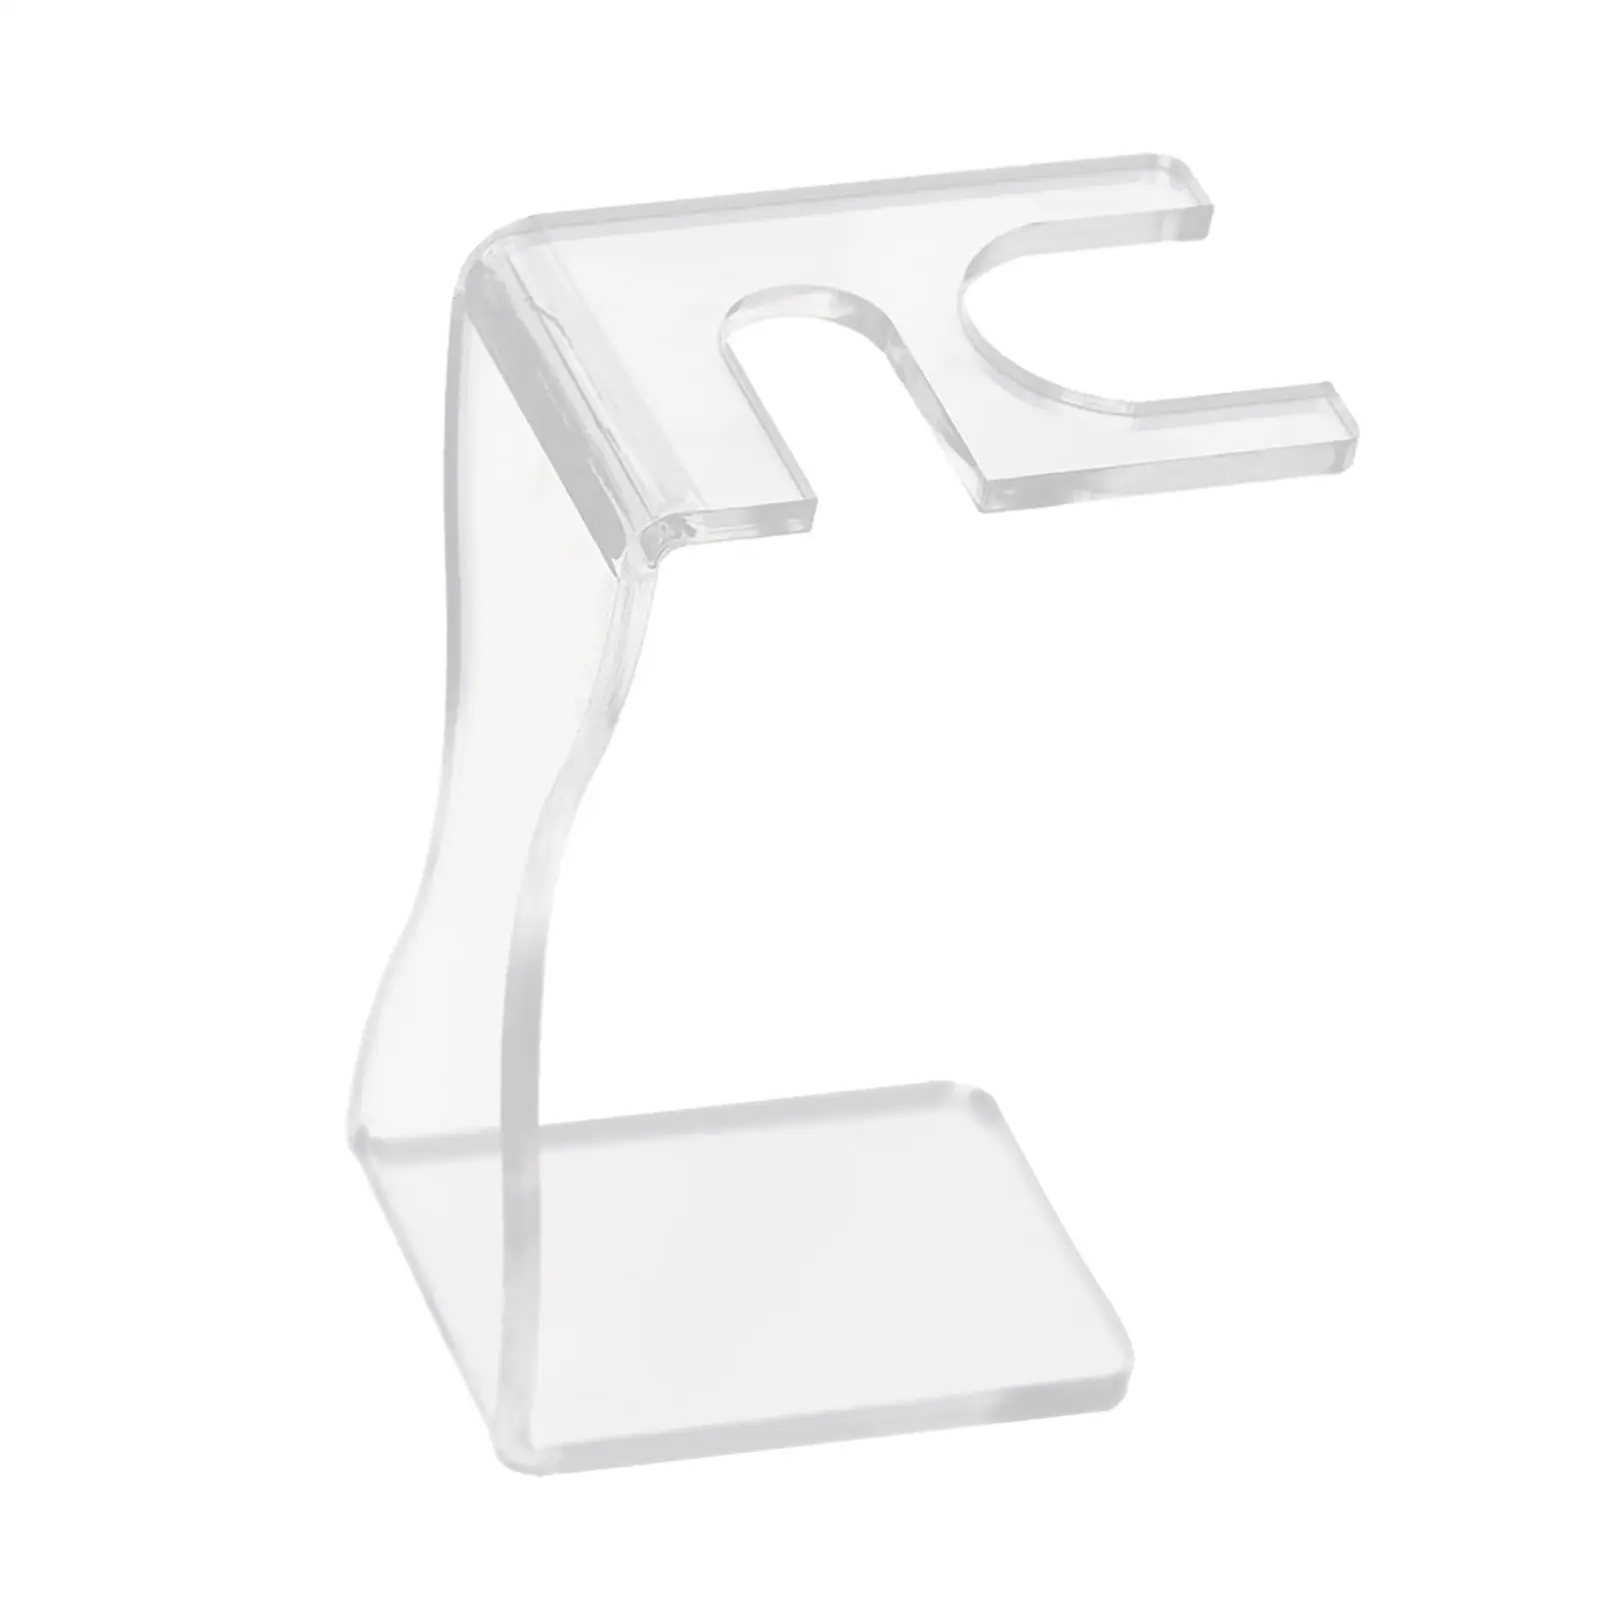 Manual Shaver Stand Holder Rack Acrylic Material Stable Bottom Sturdy Multipurpose Height 11.2cm Accessory for Boyfriend